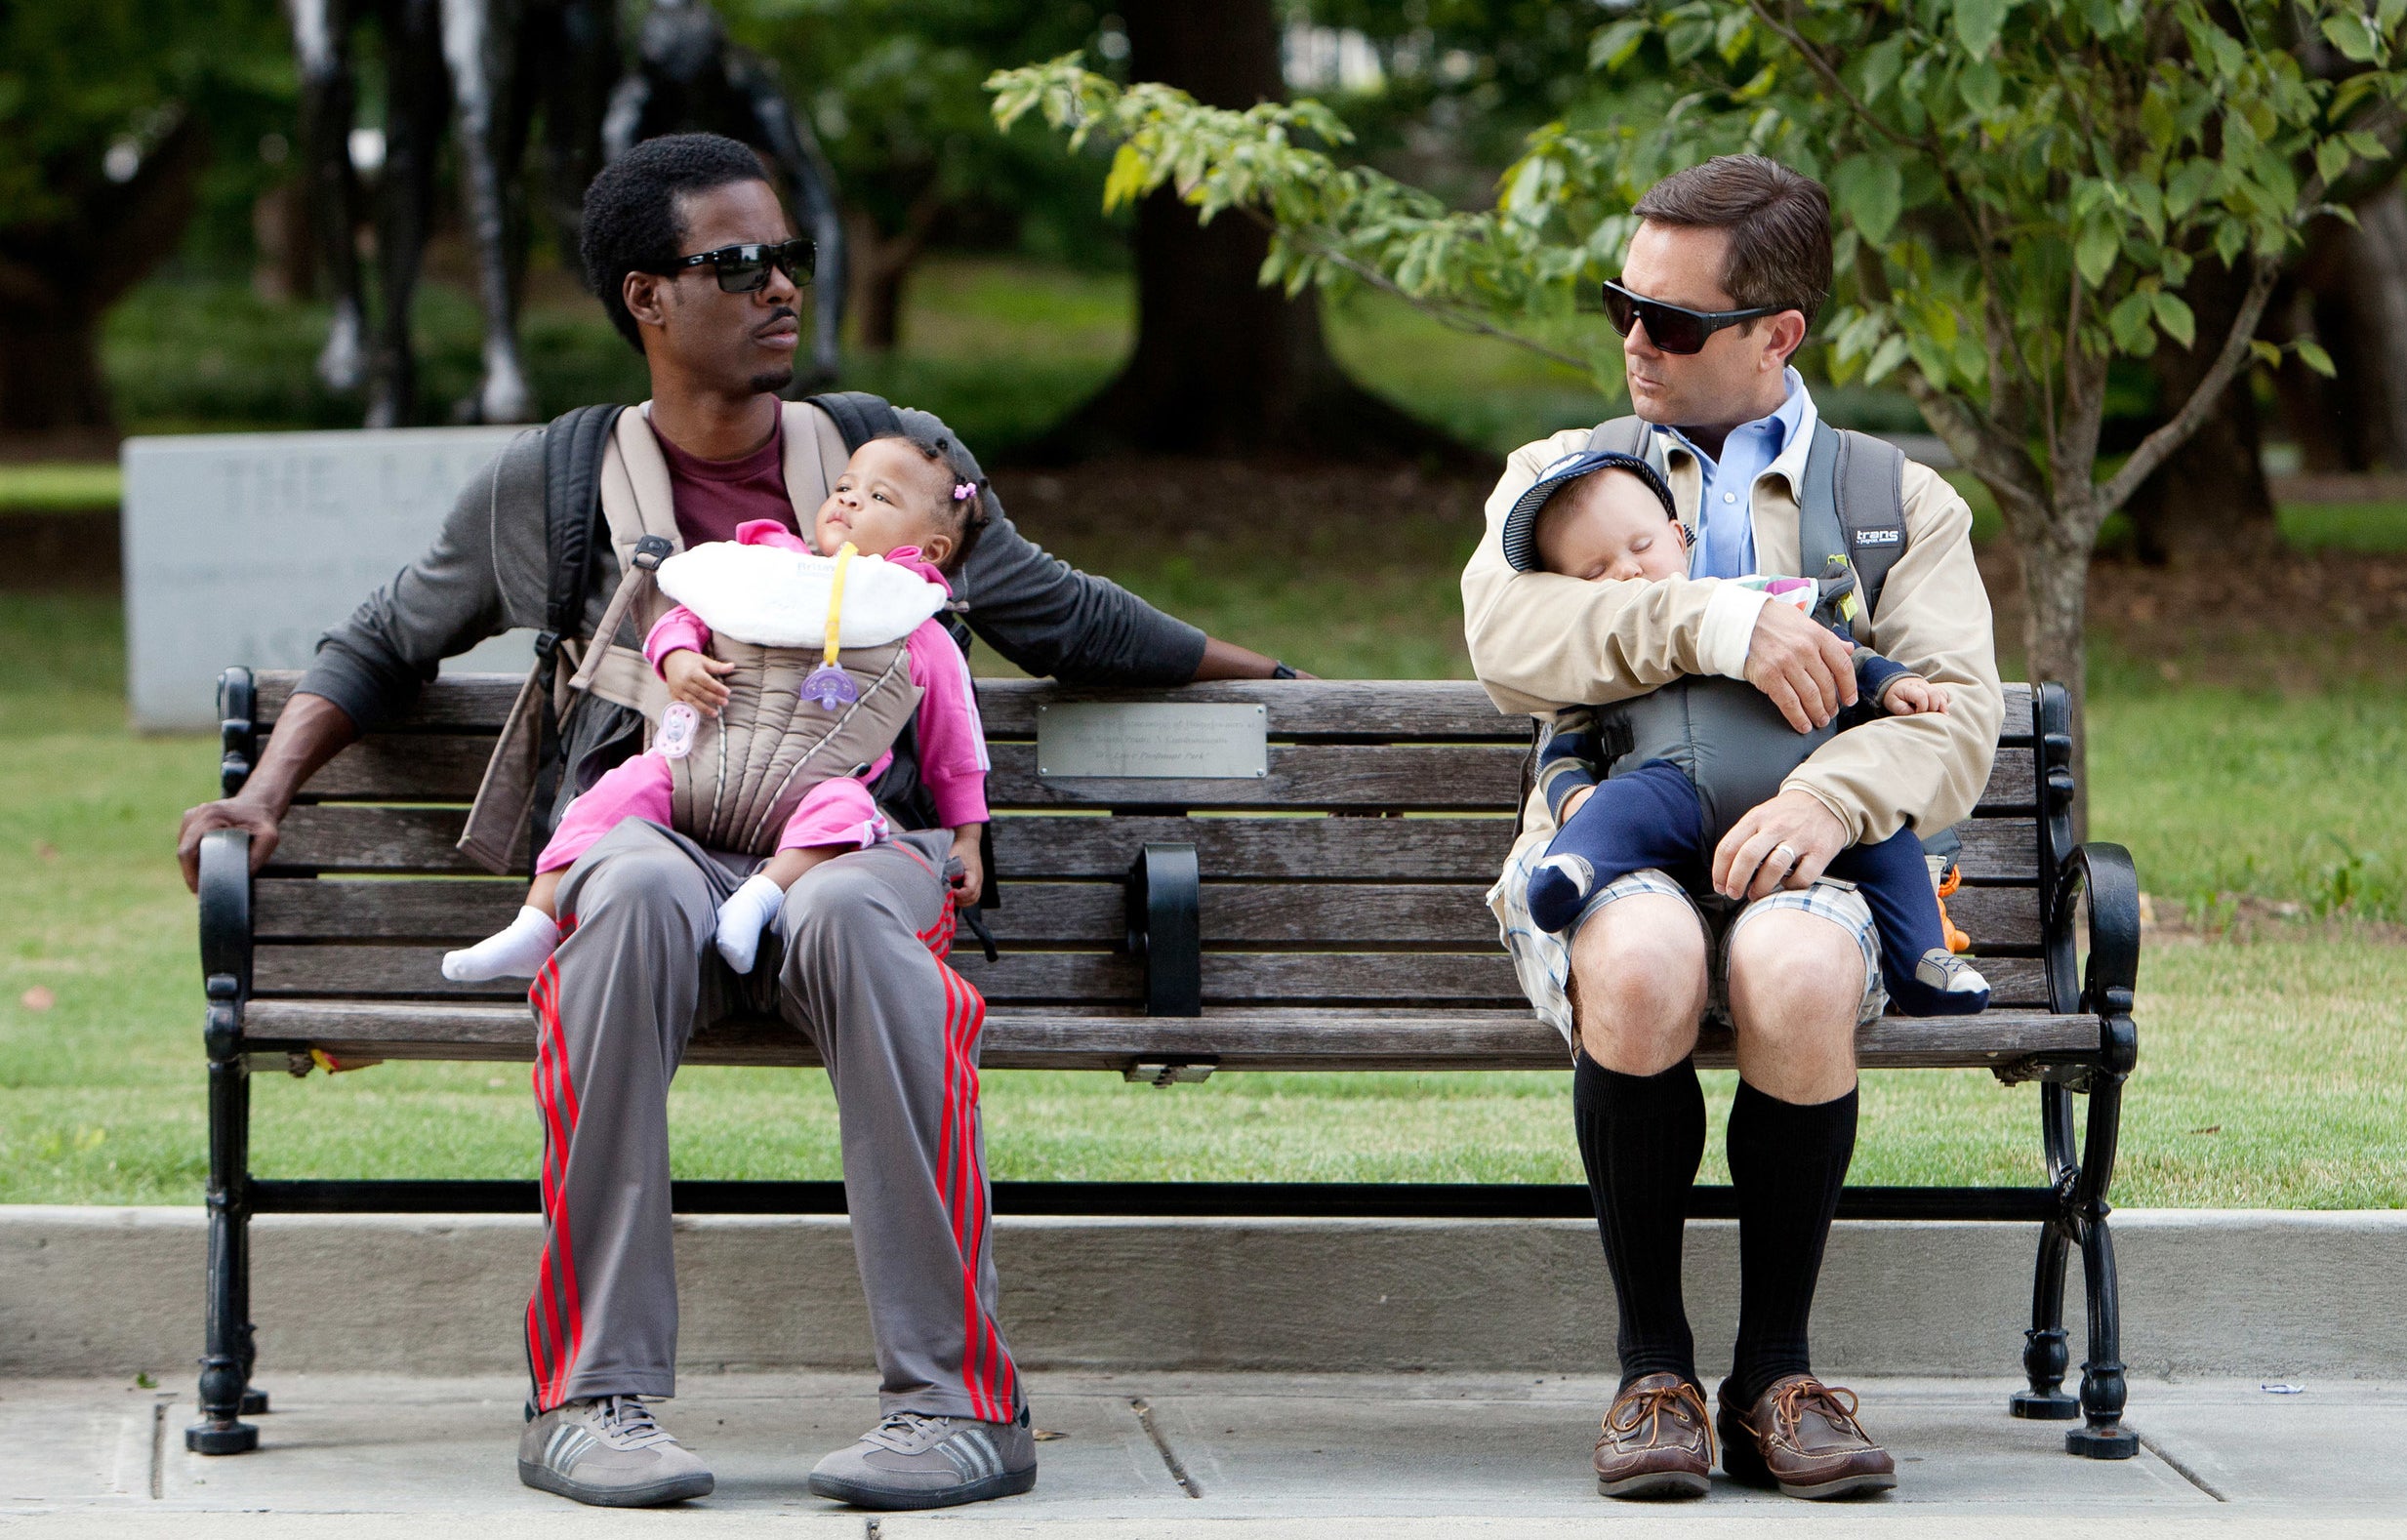 Two fathers sitting on a bench holding their kids